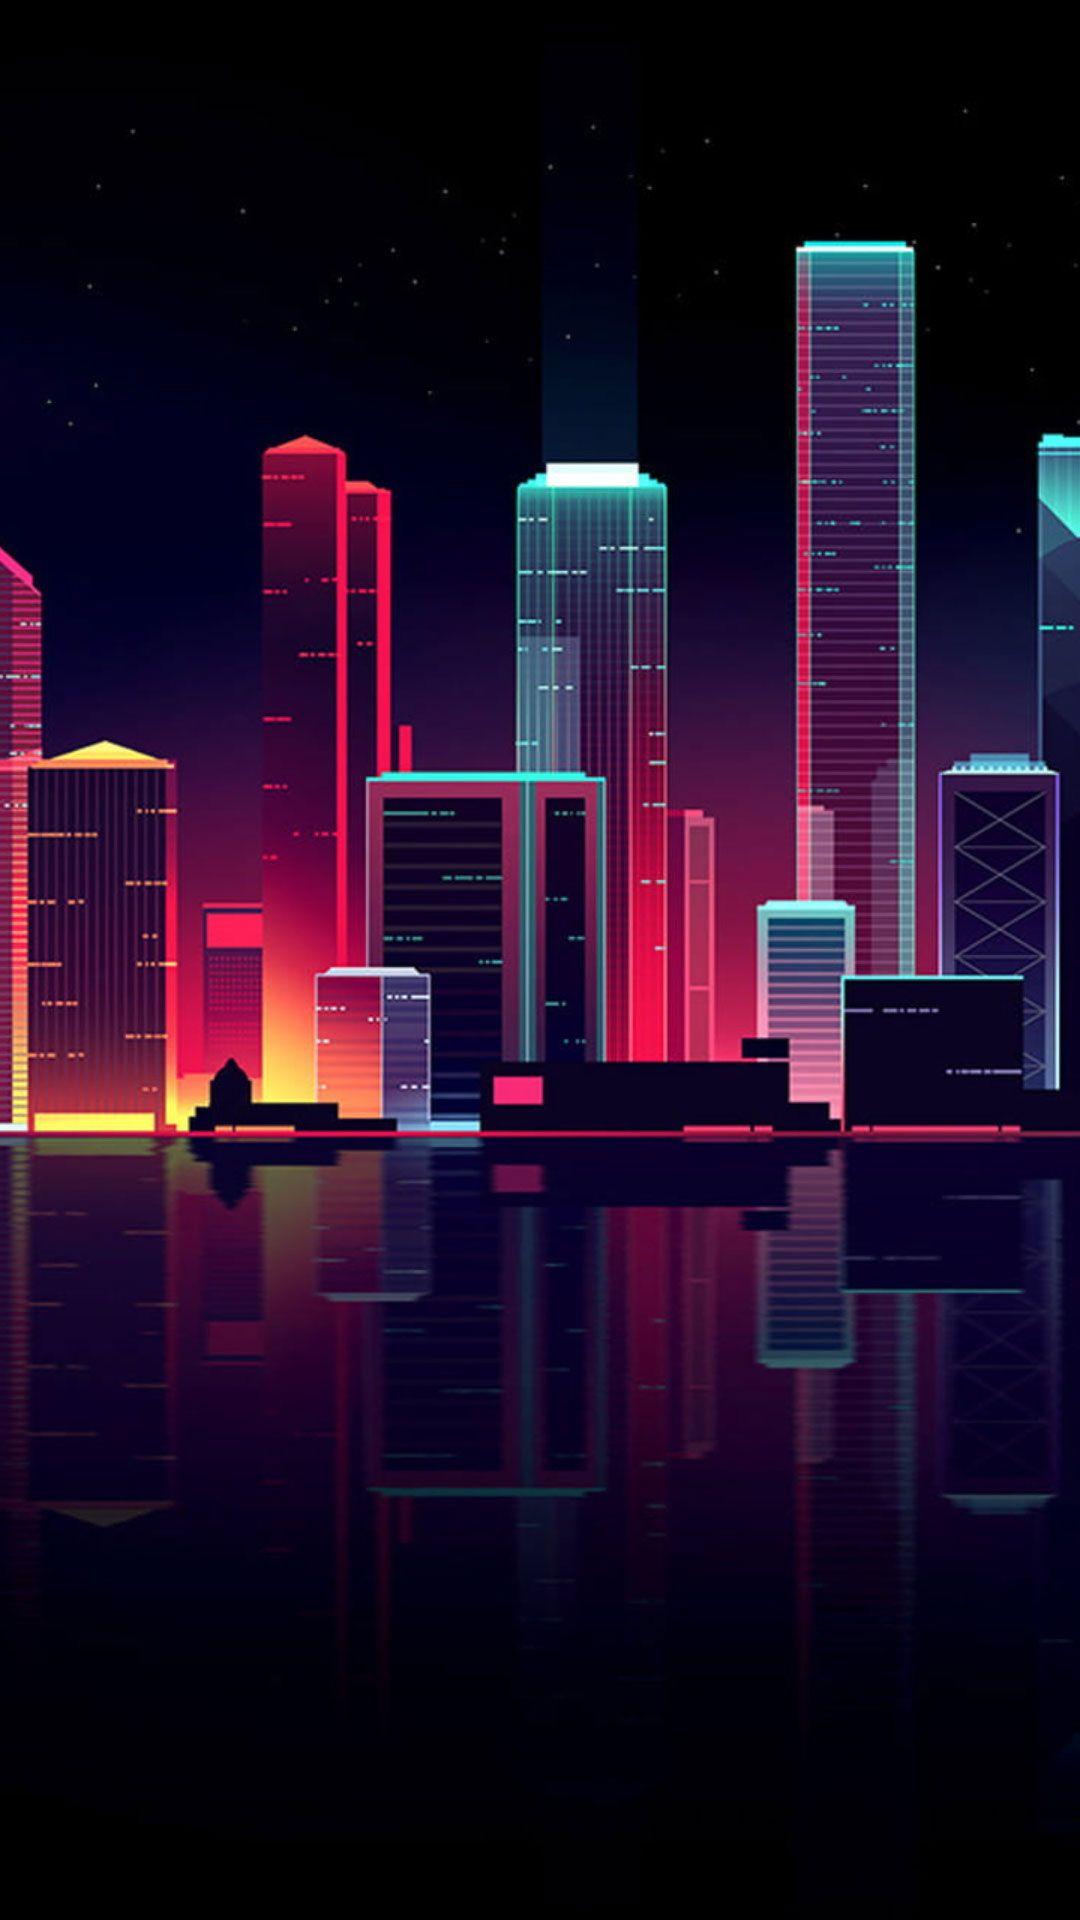 Anime Neon City Wallpapers - Top Free Anime Neon City Backgrounds